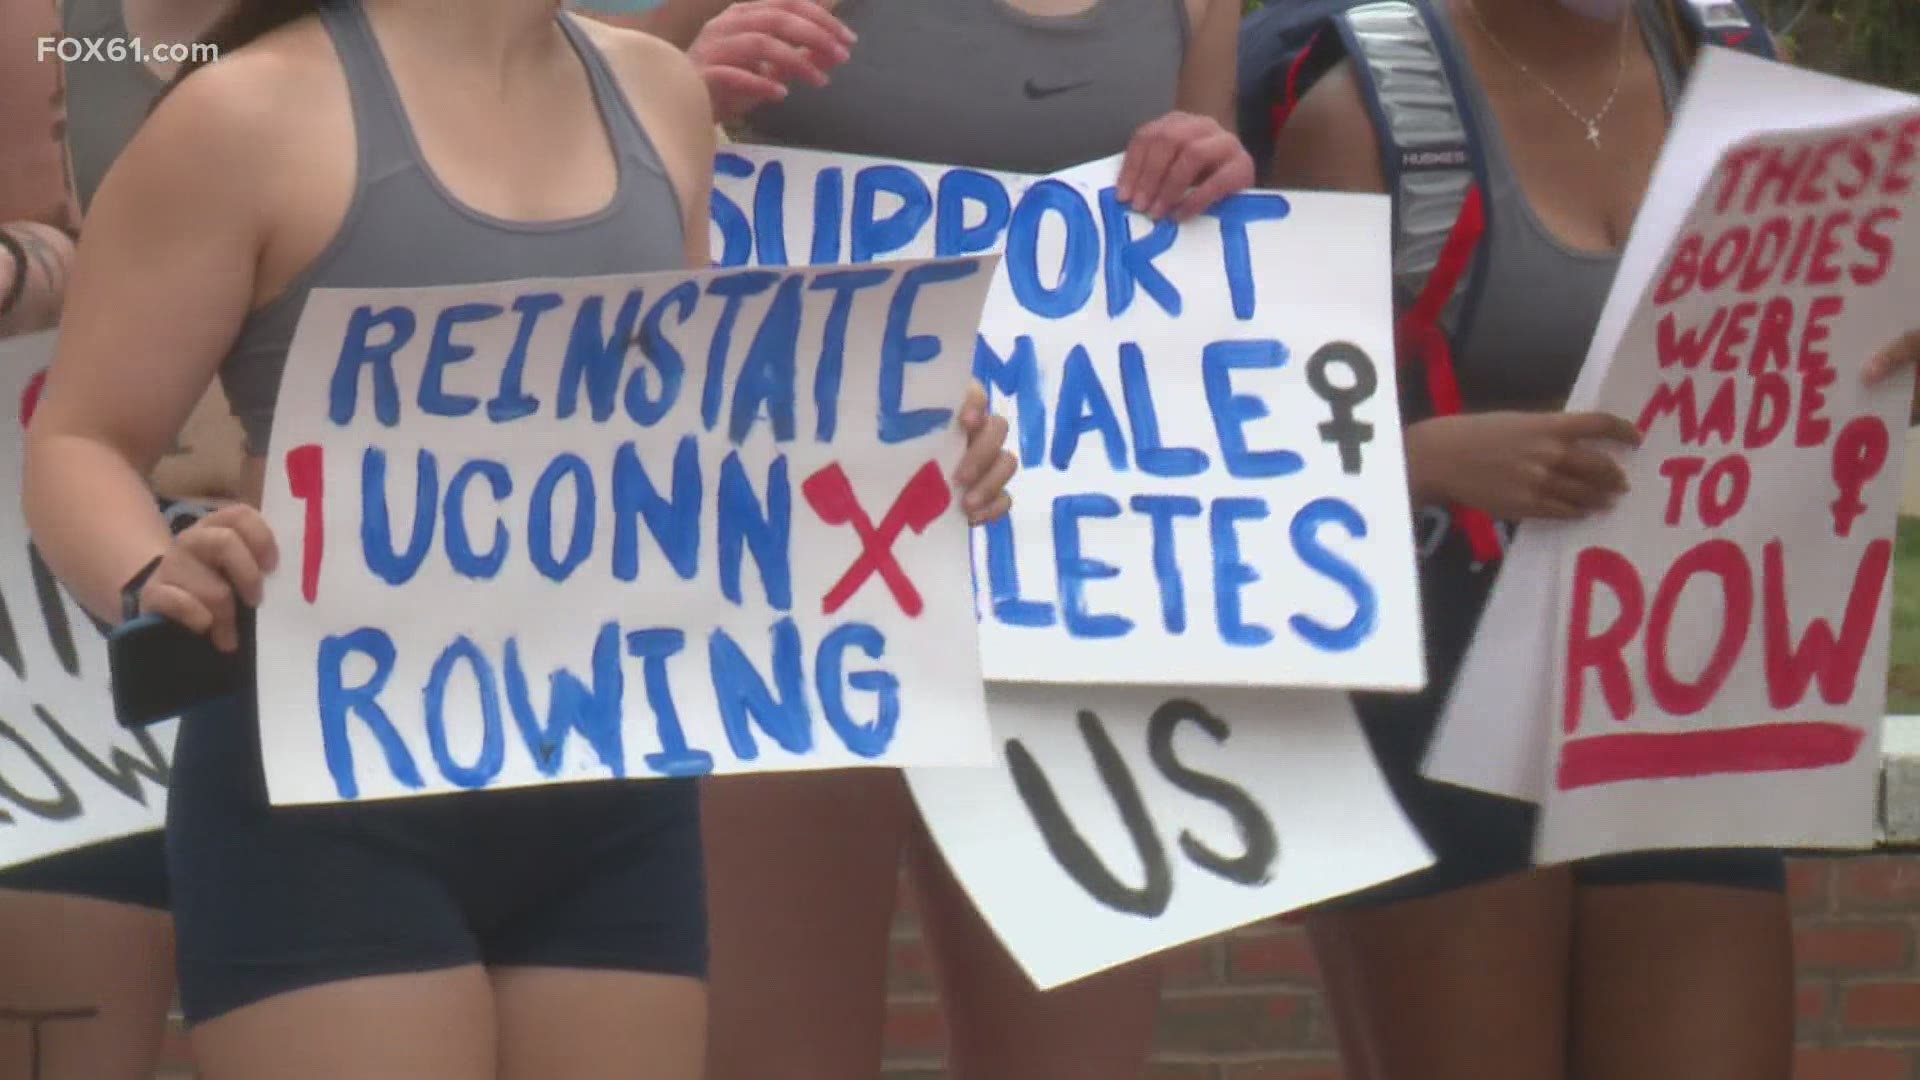 The UConn Women’s rowing team picked up their oars and marched across campus to call for the reinstatement of their sport Monday.